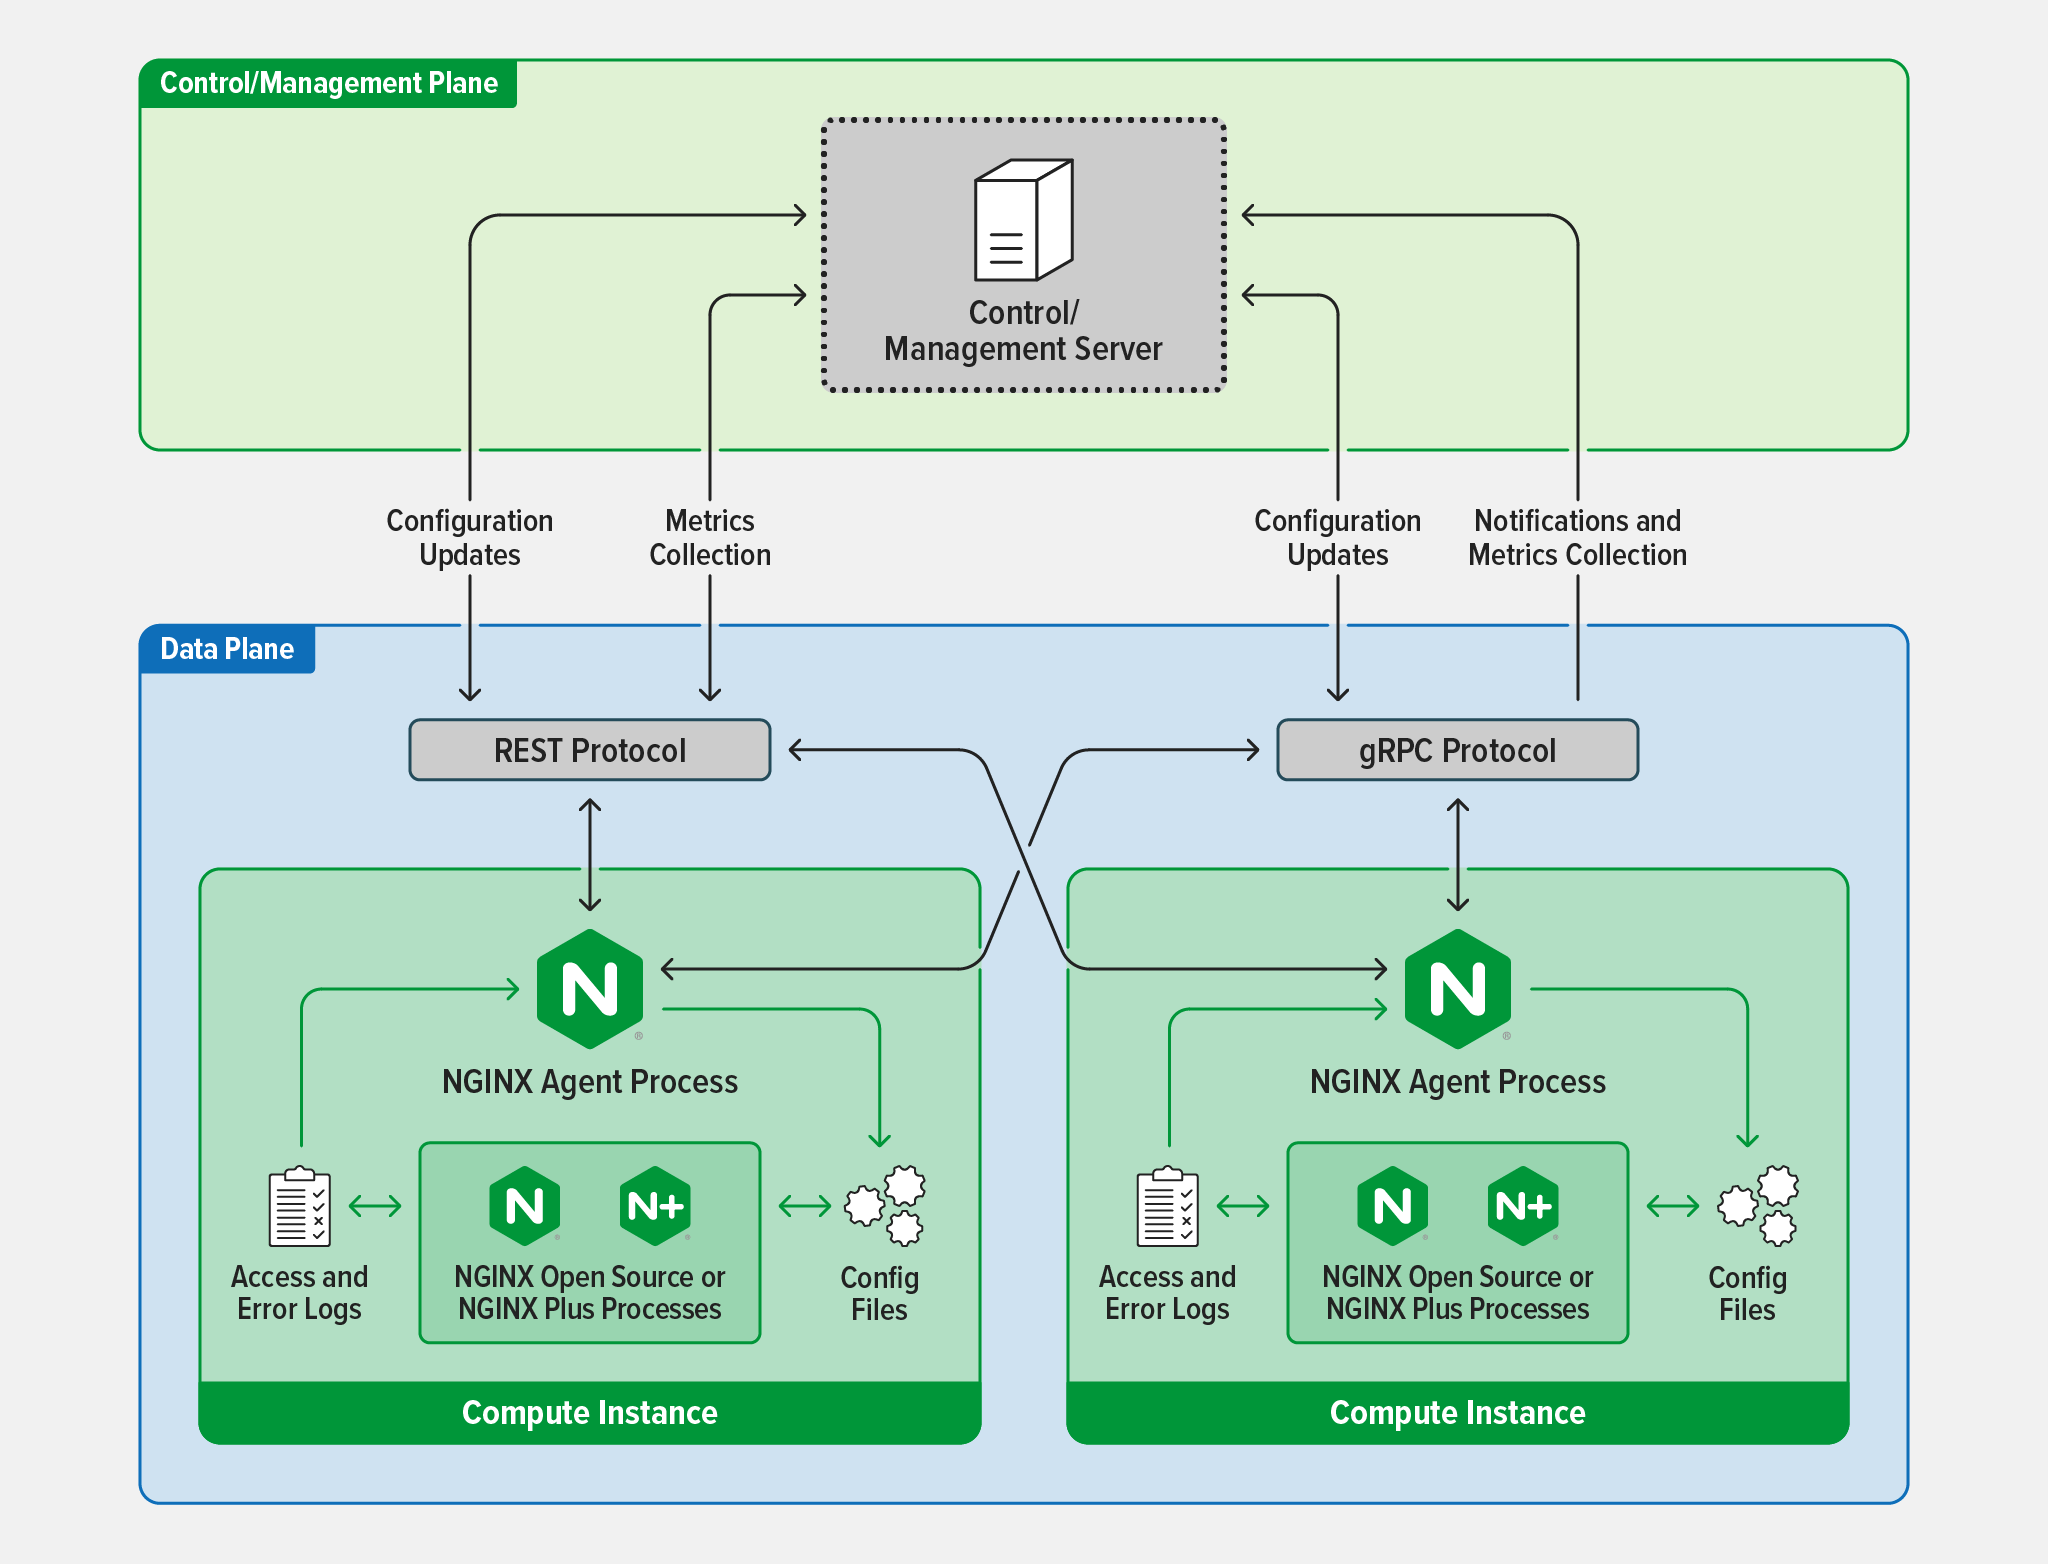 Diagram showing how NGINX Agent is colocated on the data plane with NGINX instances and communicates with a server on the control/management plane for metrics collection and configuration management